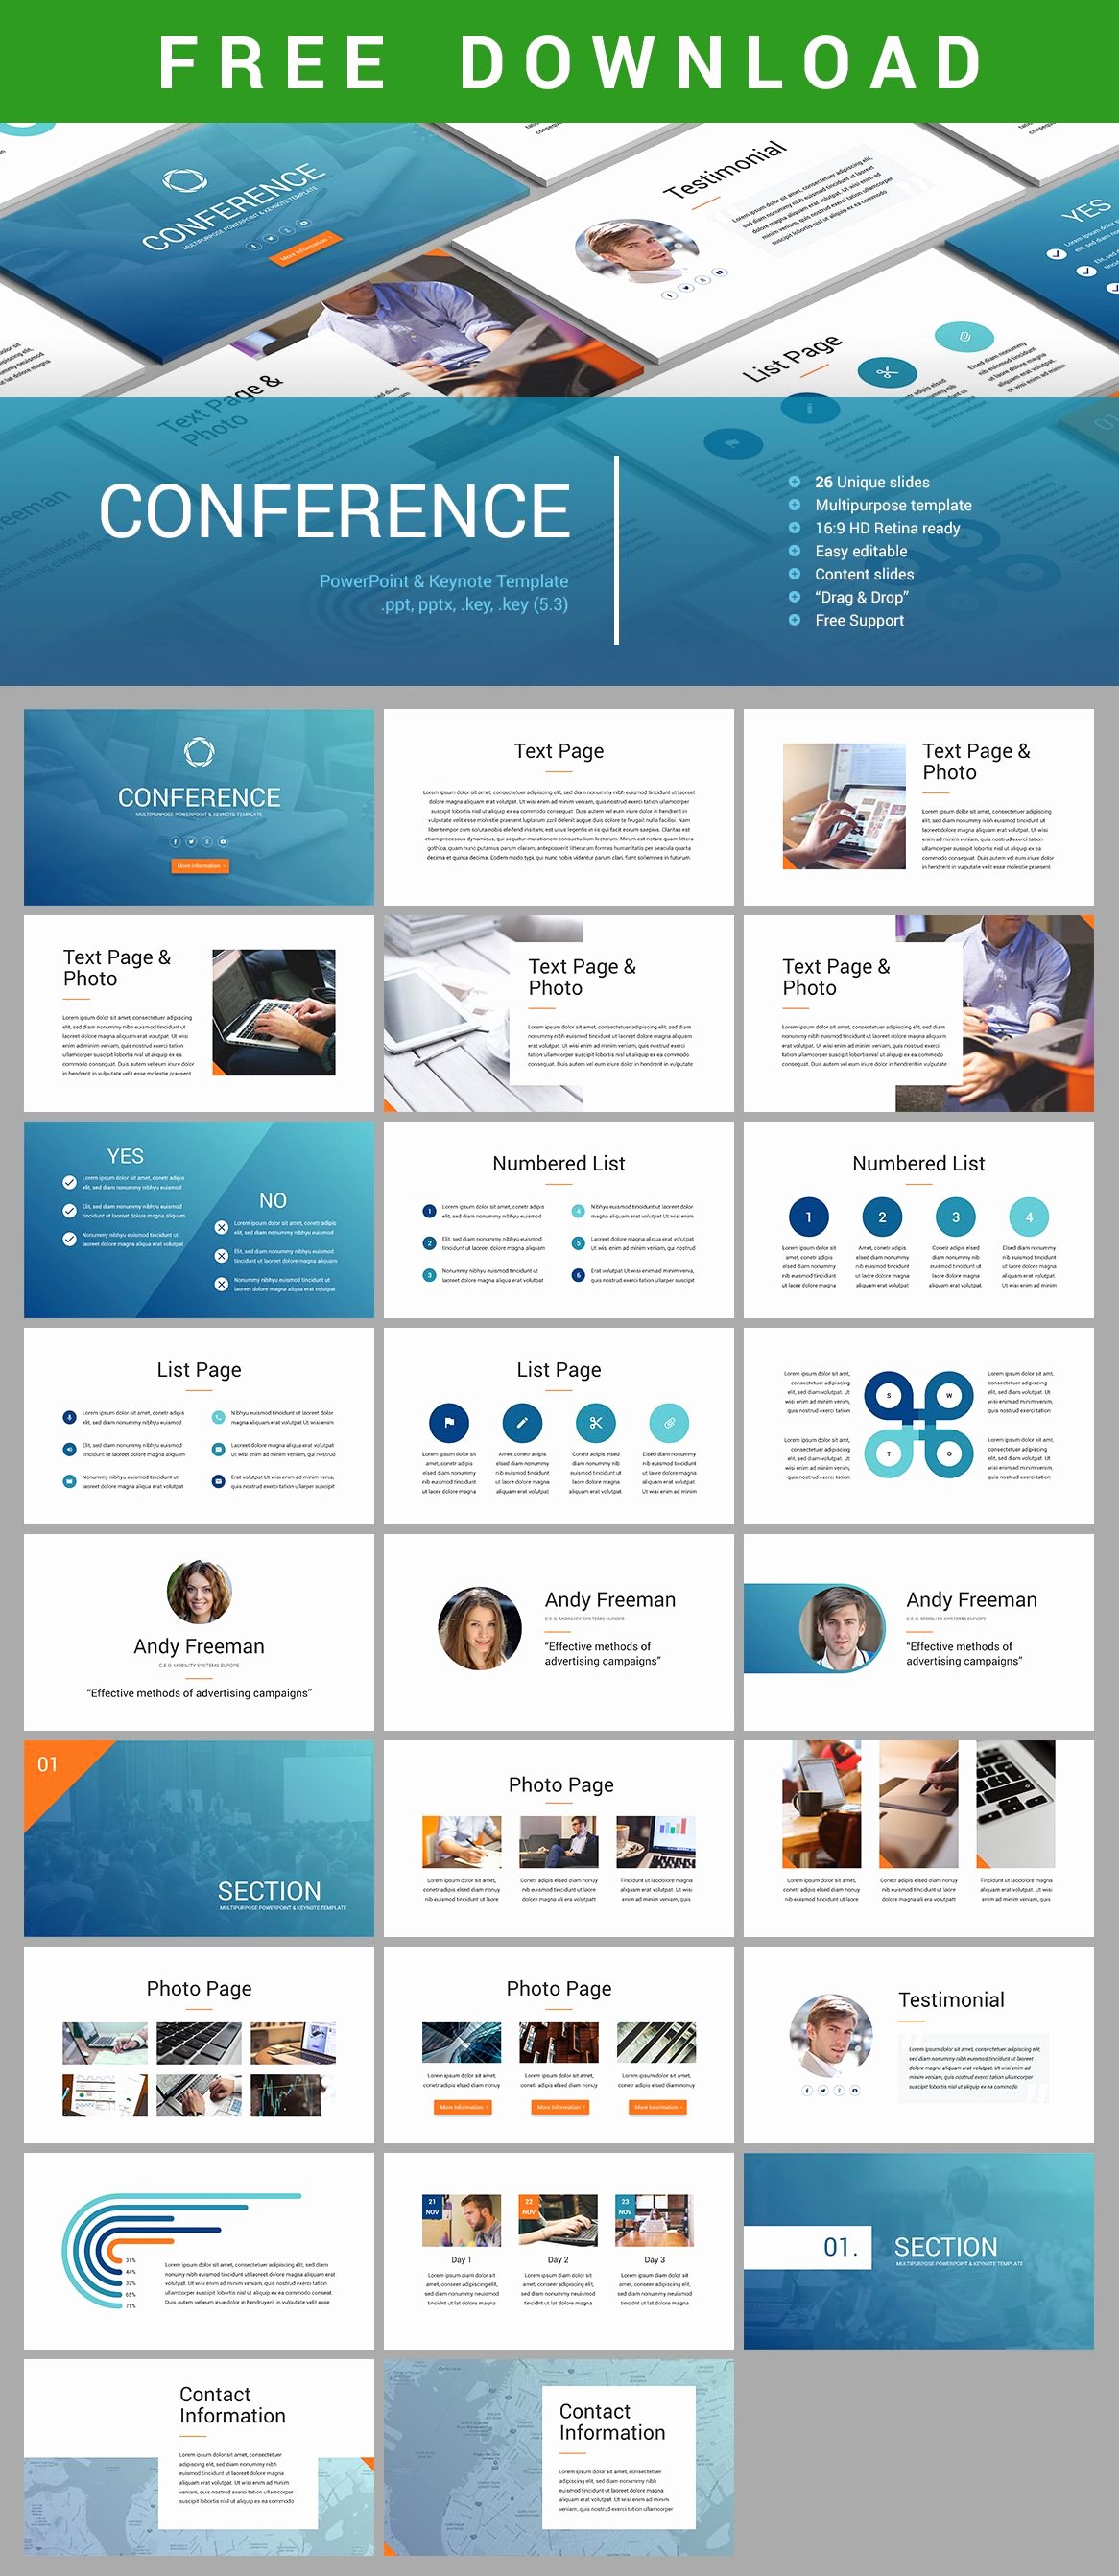 Conference Presentation Ppt Template Awesome Free Download Conference Powerpoint &amp; Keynote Template